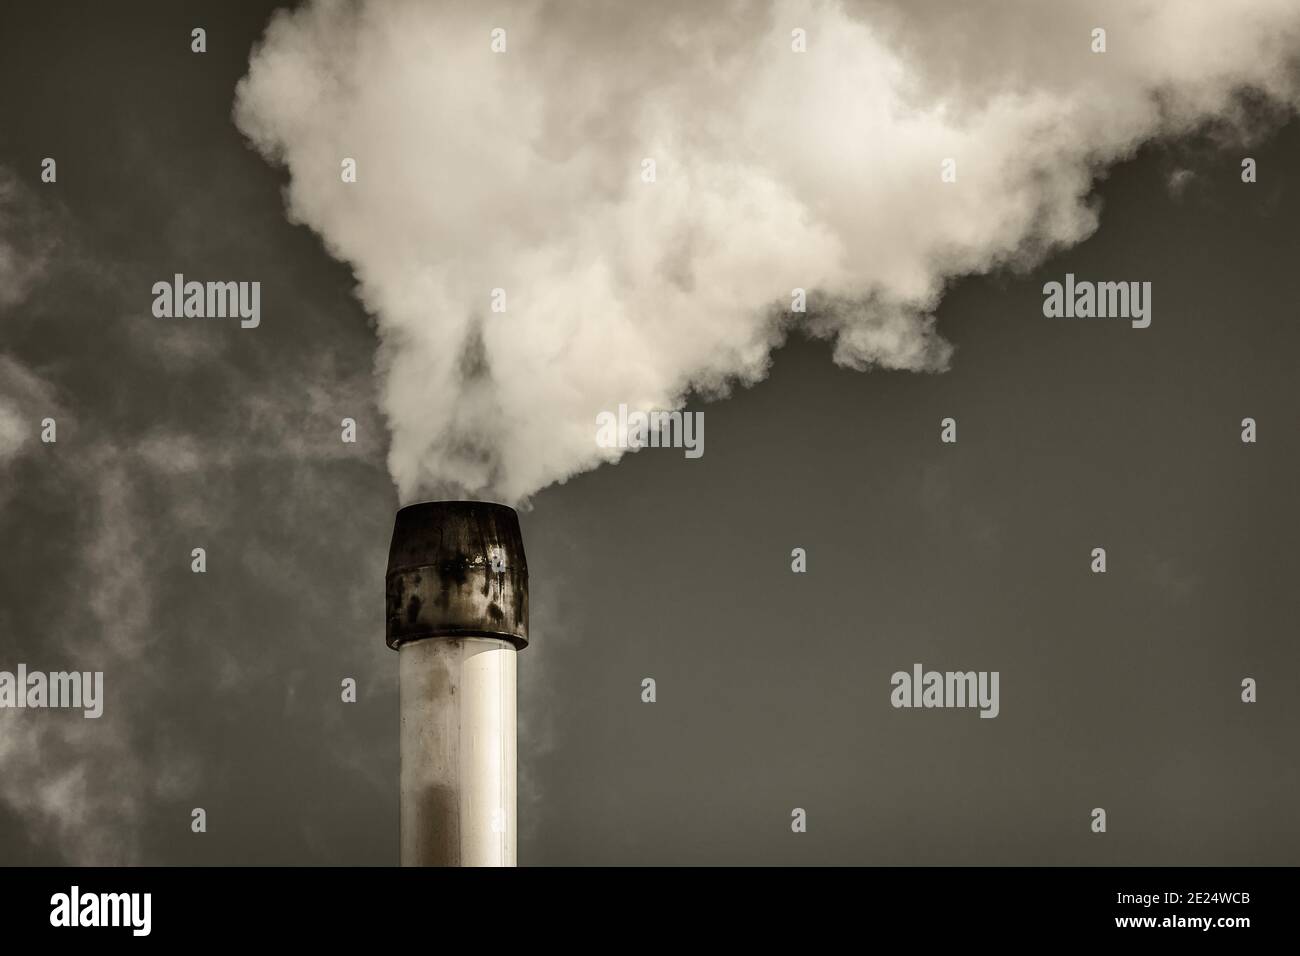 Retro styled image of air pollution from a factory pipe Stock Photo